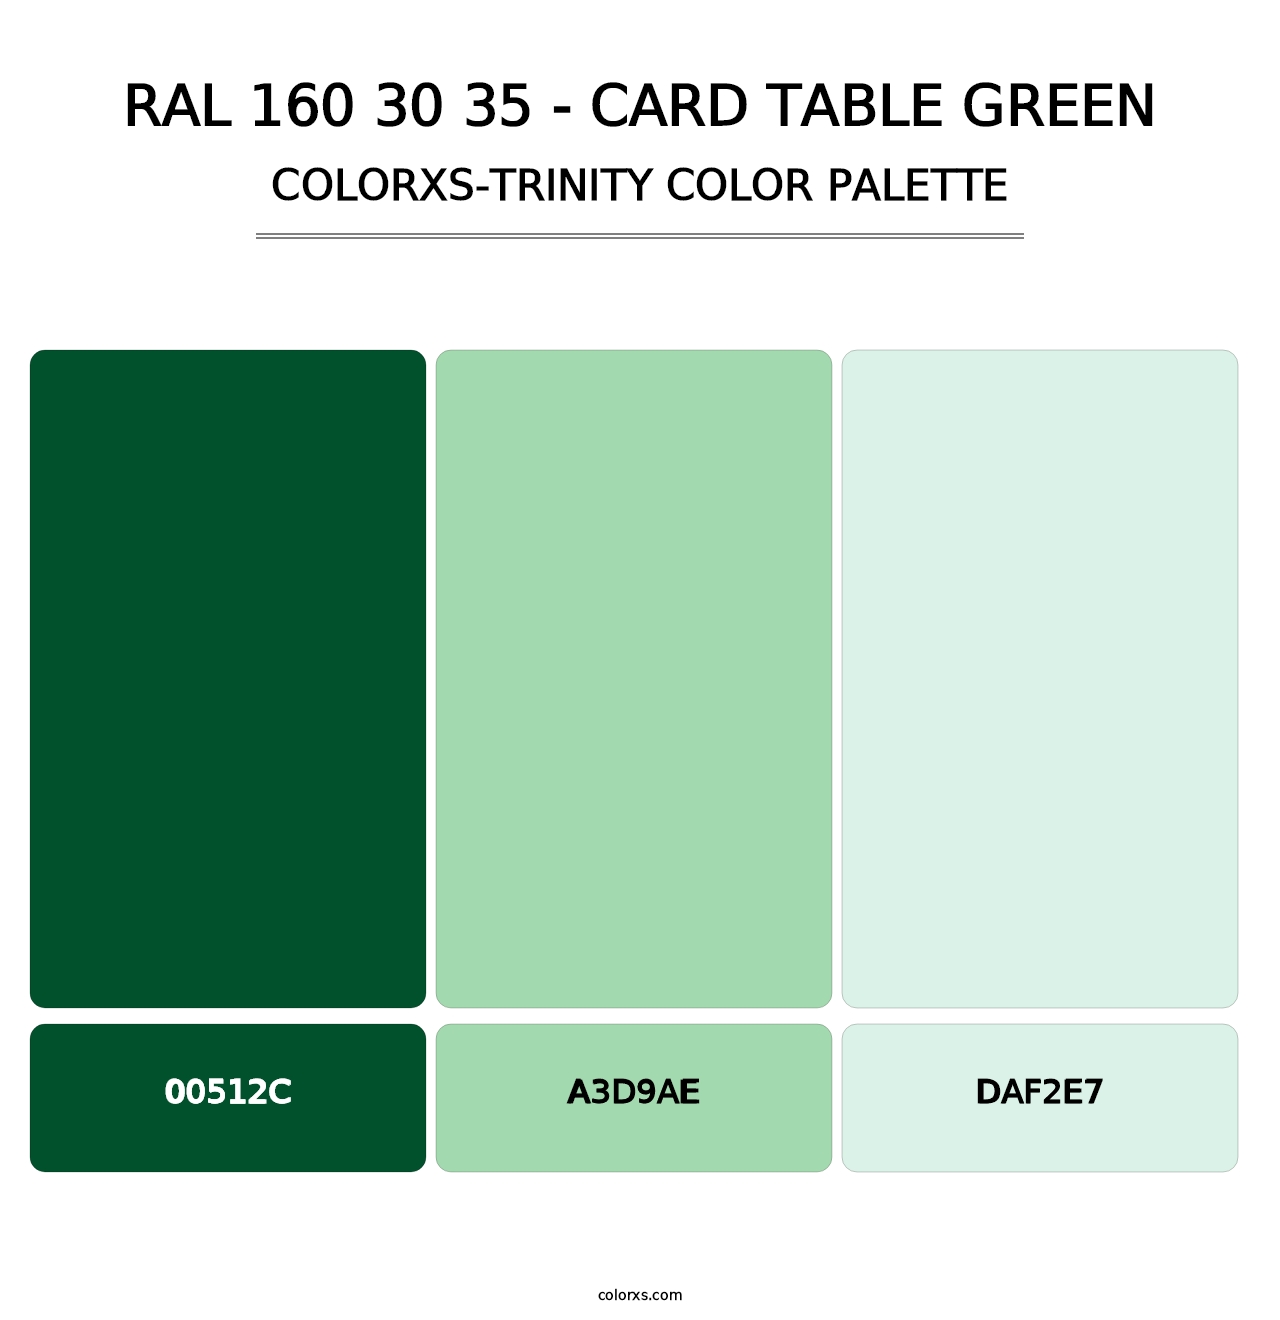 RAL 160 30 35 - Card Table Green - Colorxs Trinity Palette